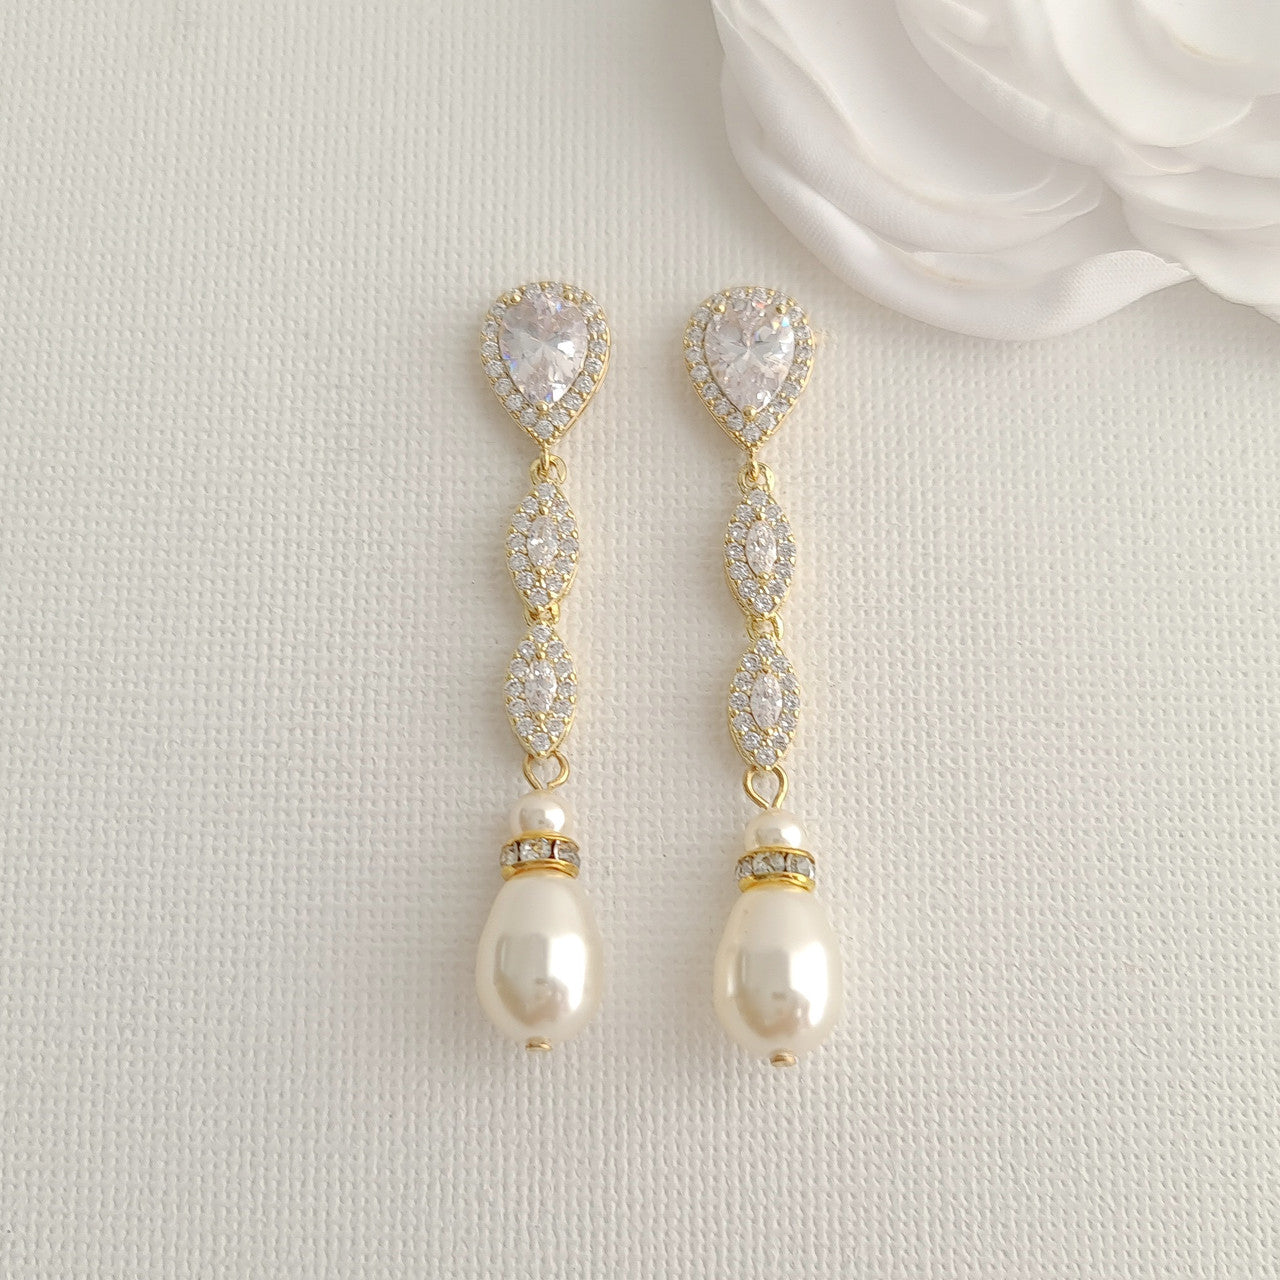 Gold and Pearl Jewellery Set for Wedding-Abby